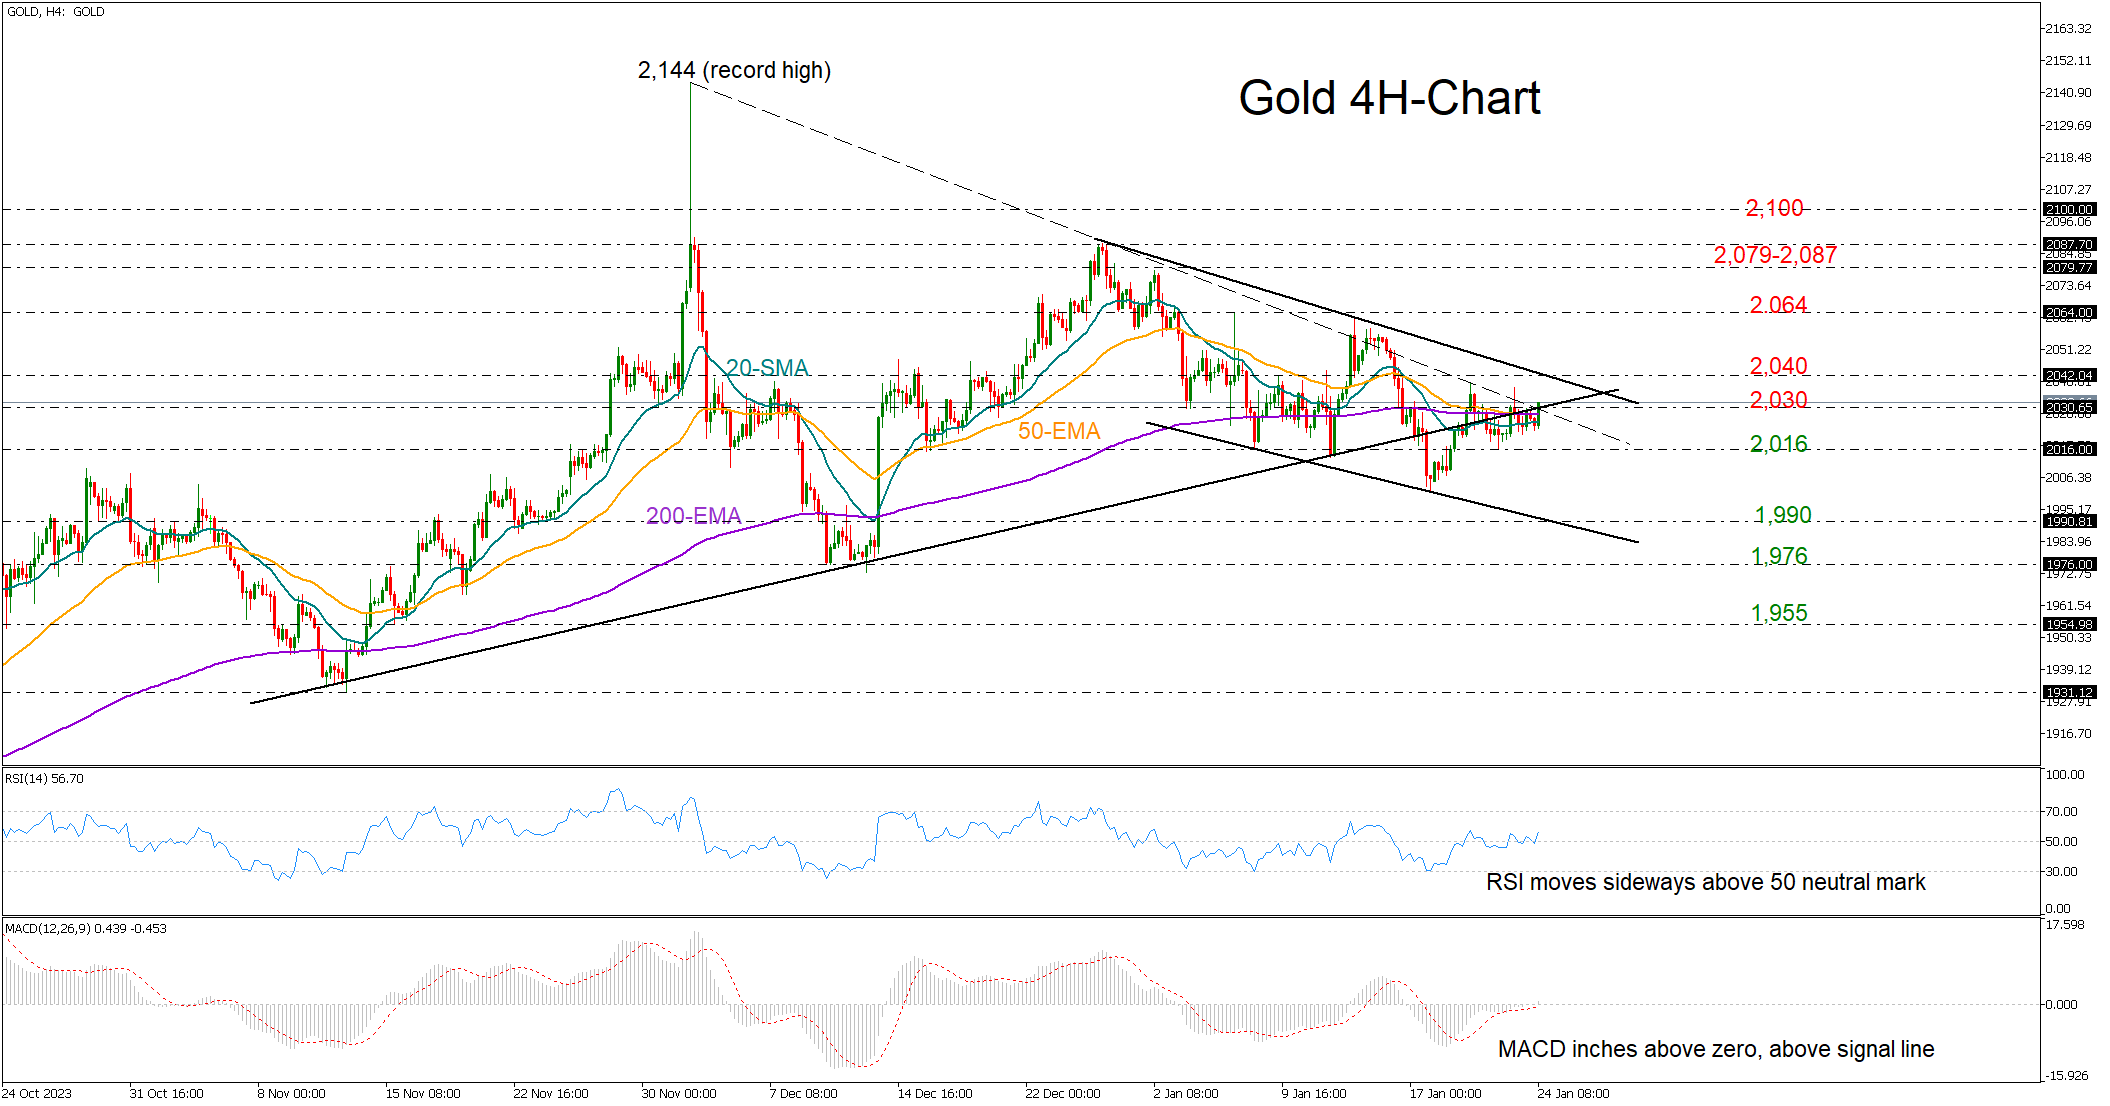 Gold's Uncertain Path: A Cautious Outlook Ahead of FOMC Policy Announcement